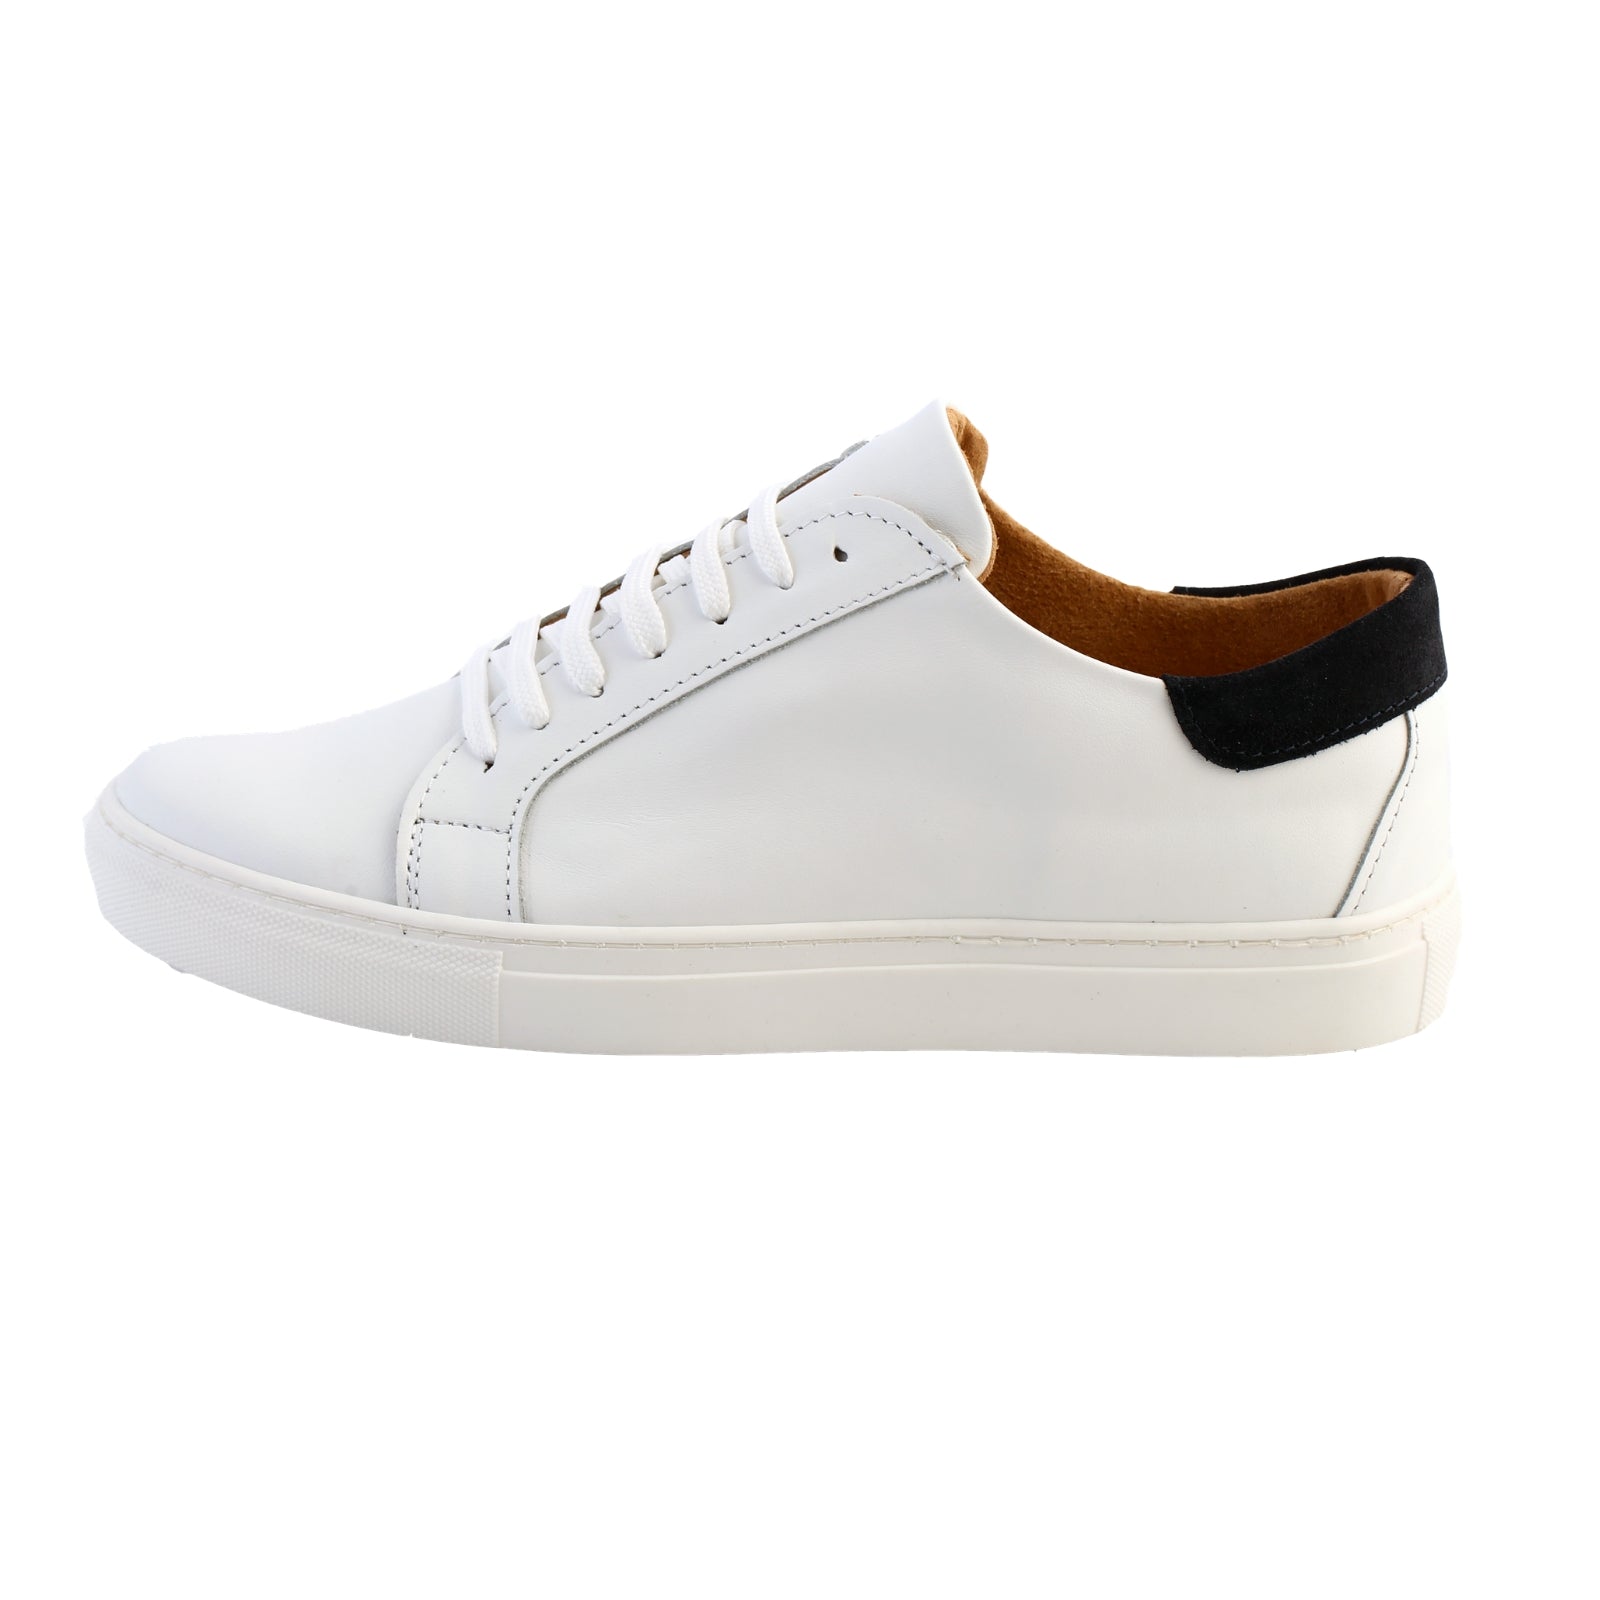 sneakers uomo bianche pelle